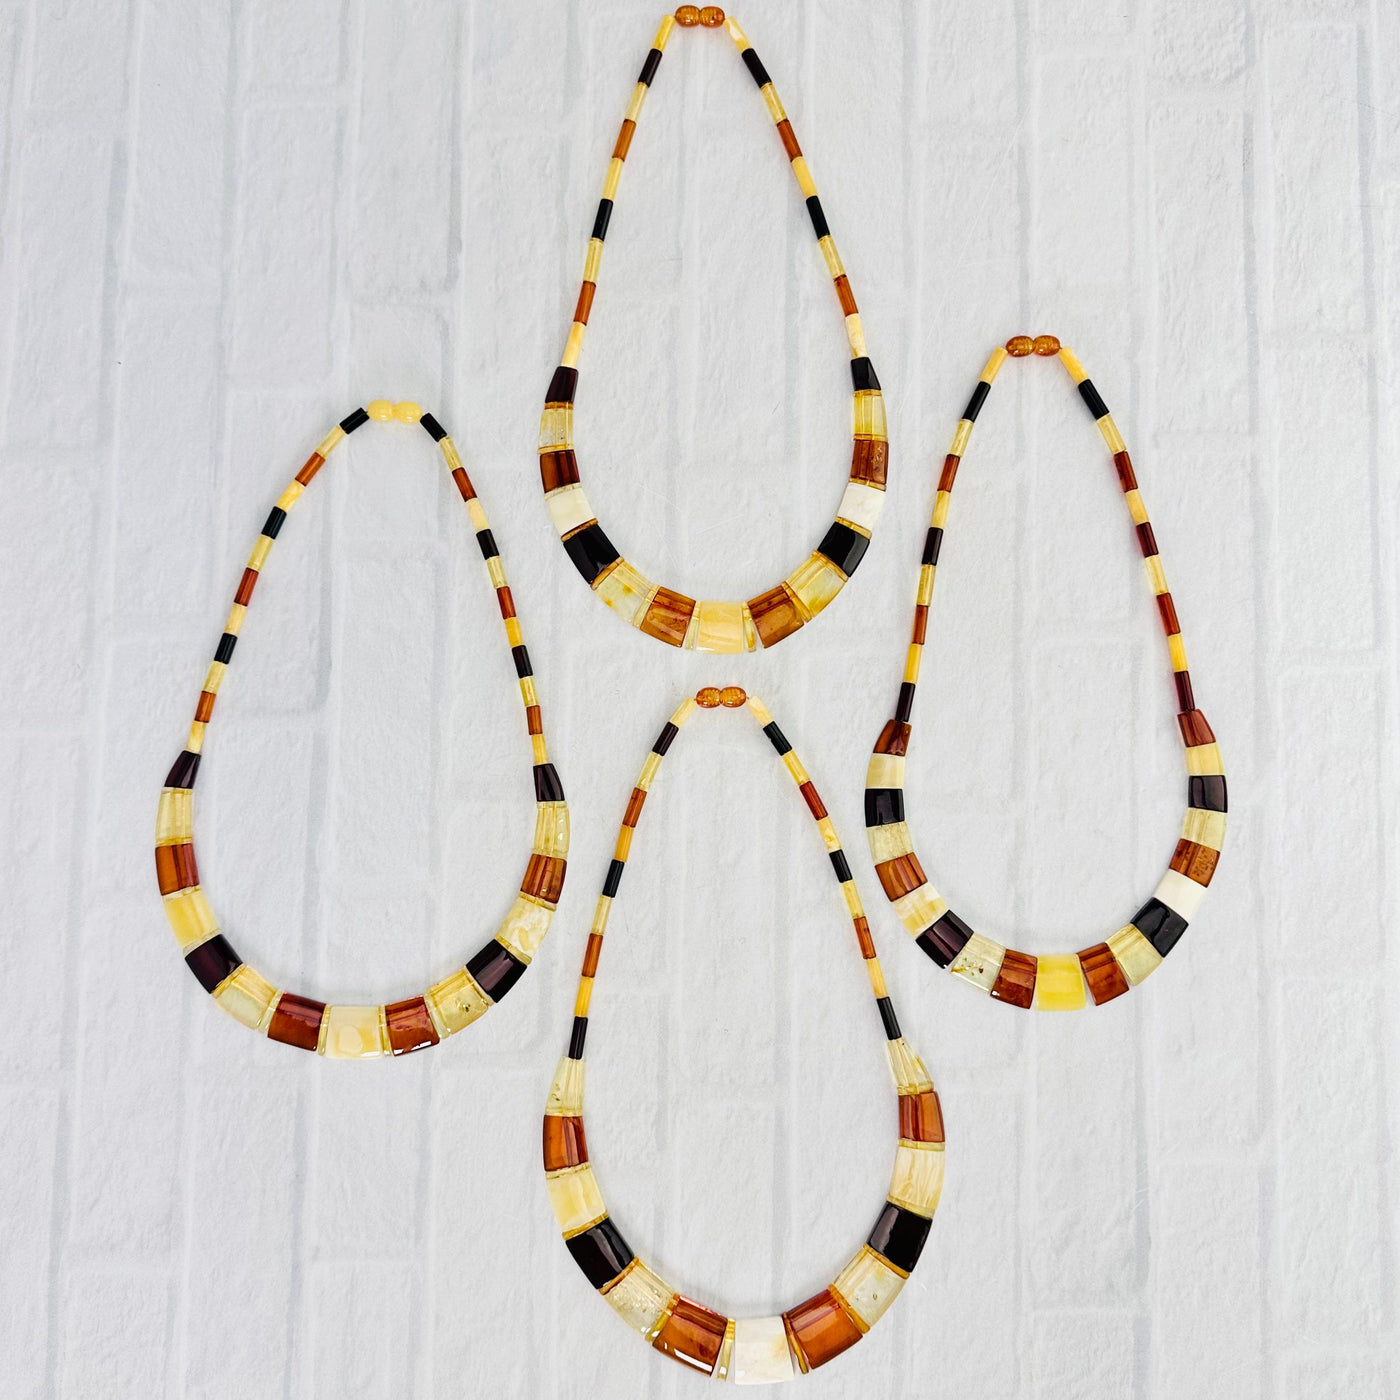 Aerial view of necklaces, F, G, H and I, on a white surface.